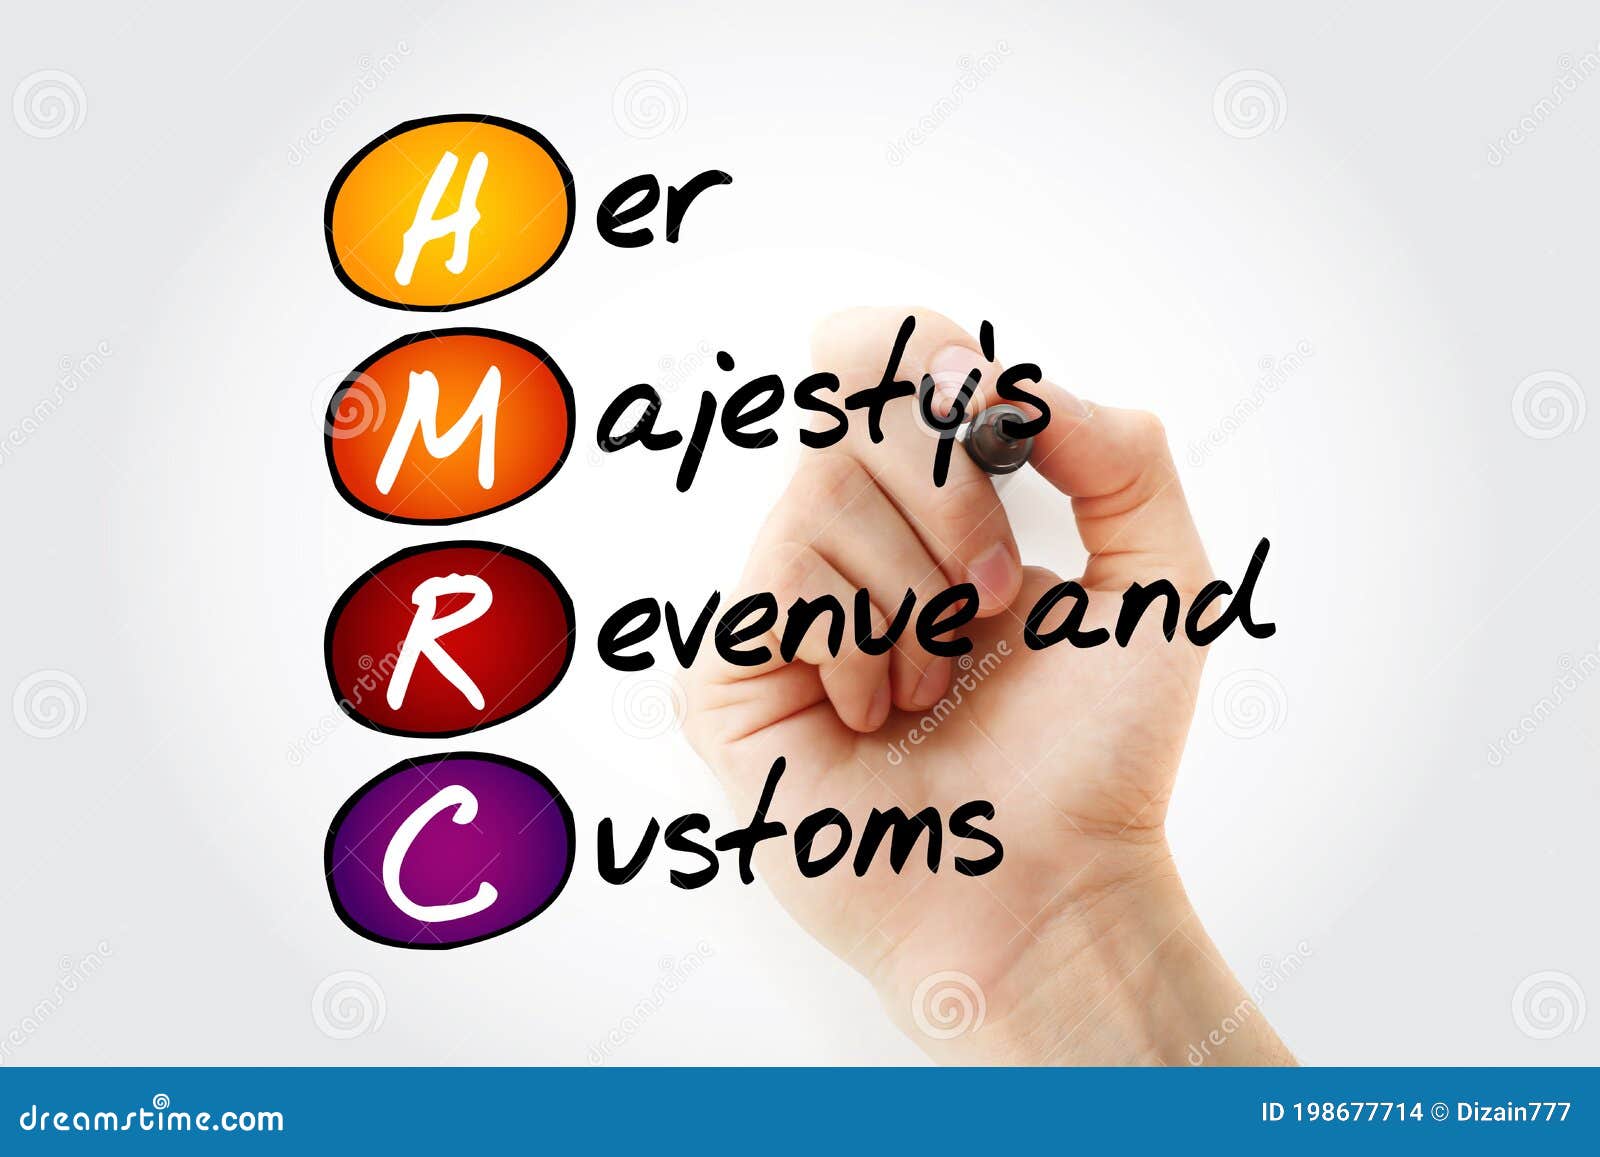 hmrc - her majesty`s revenue and customs acronym with marker, business concept background